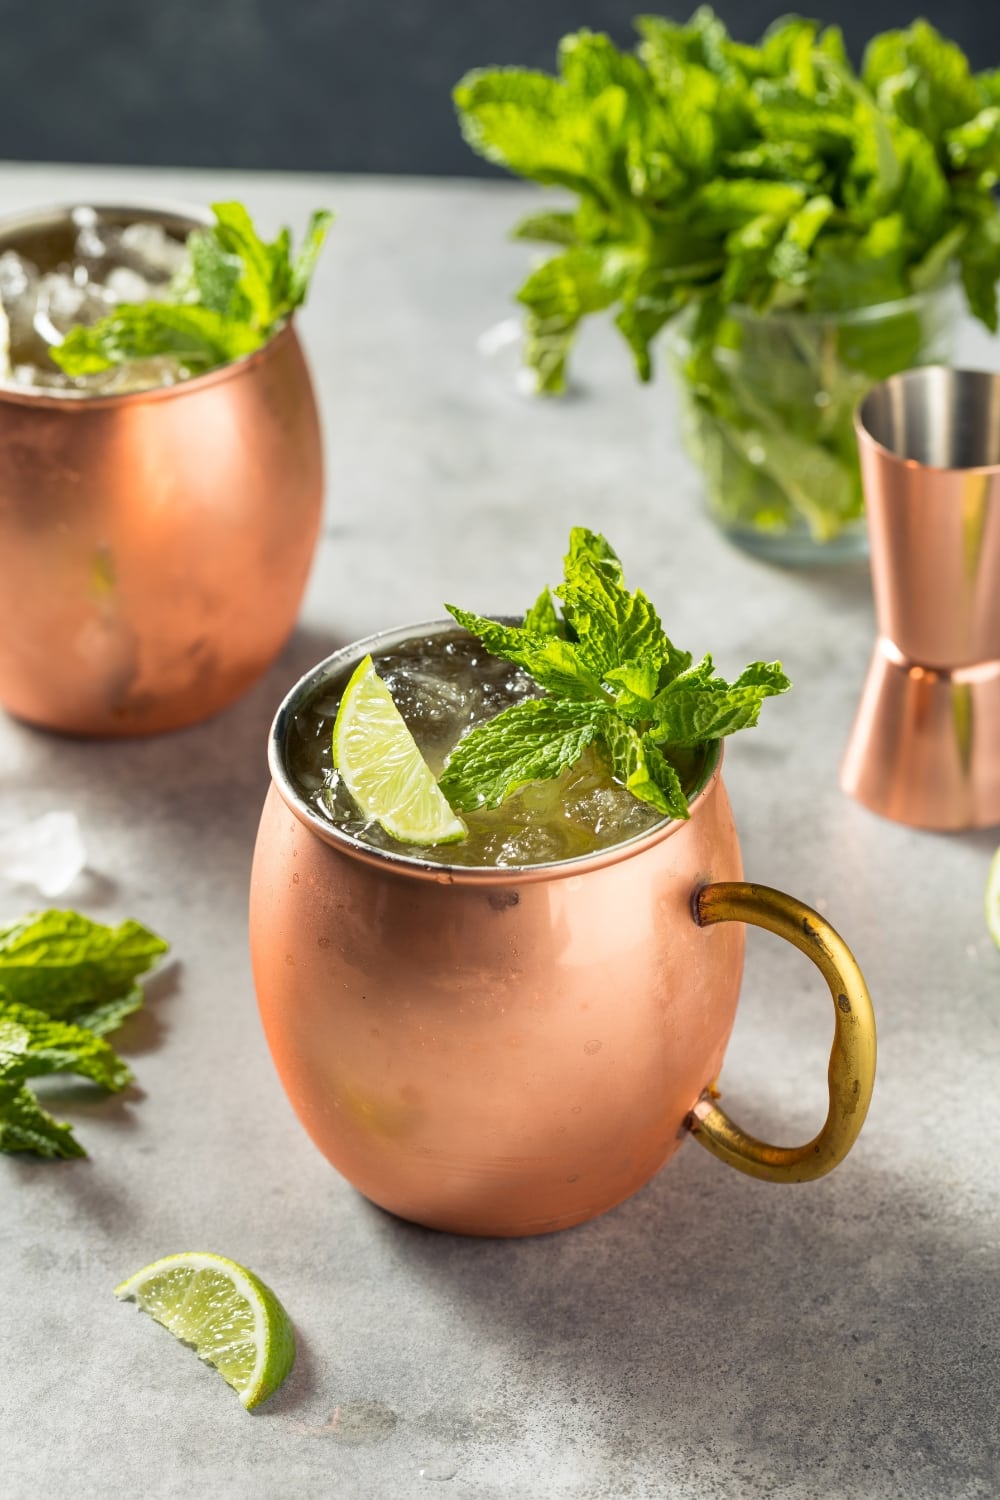 Ice Cold Boozy Refreshing Irish Mule Cocktail Garnished with Lemon Slices and Fresh Mint Leaves